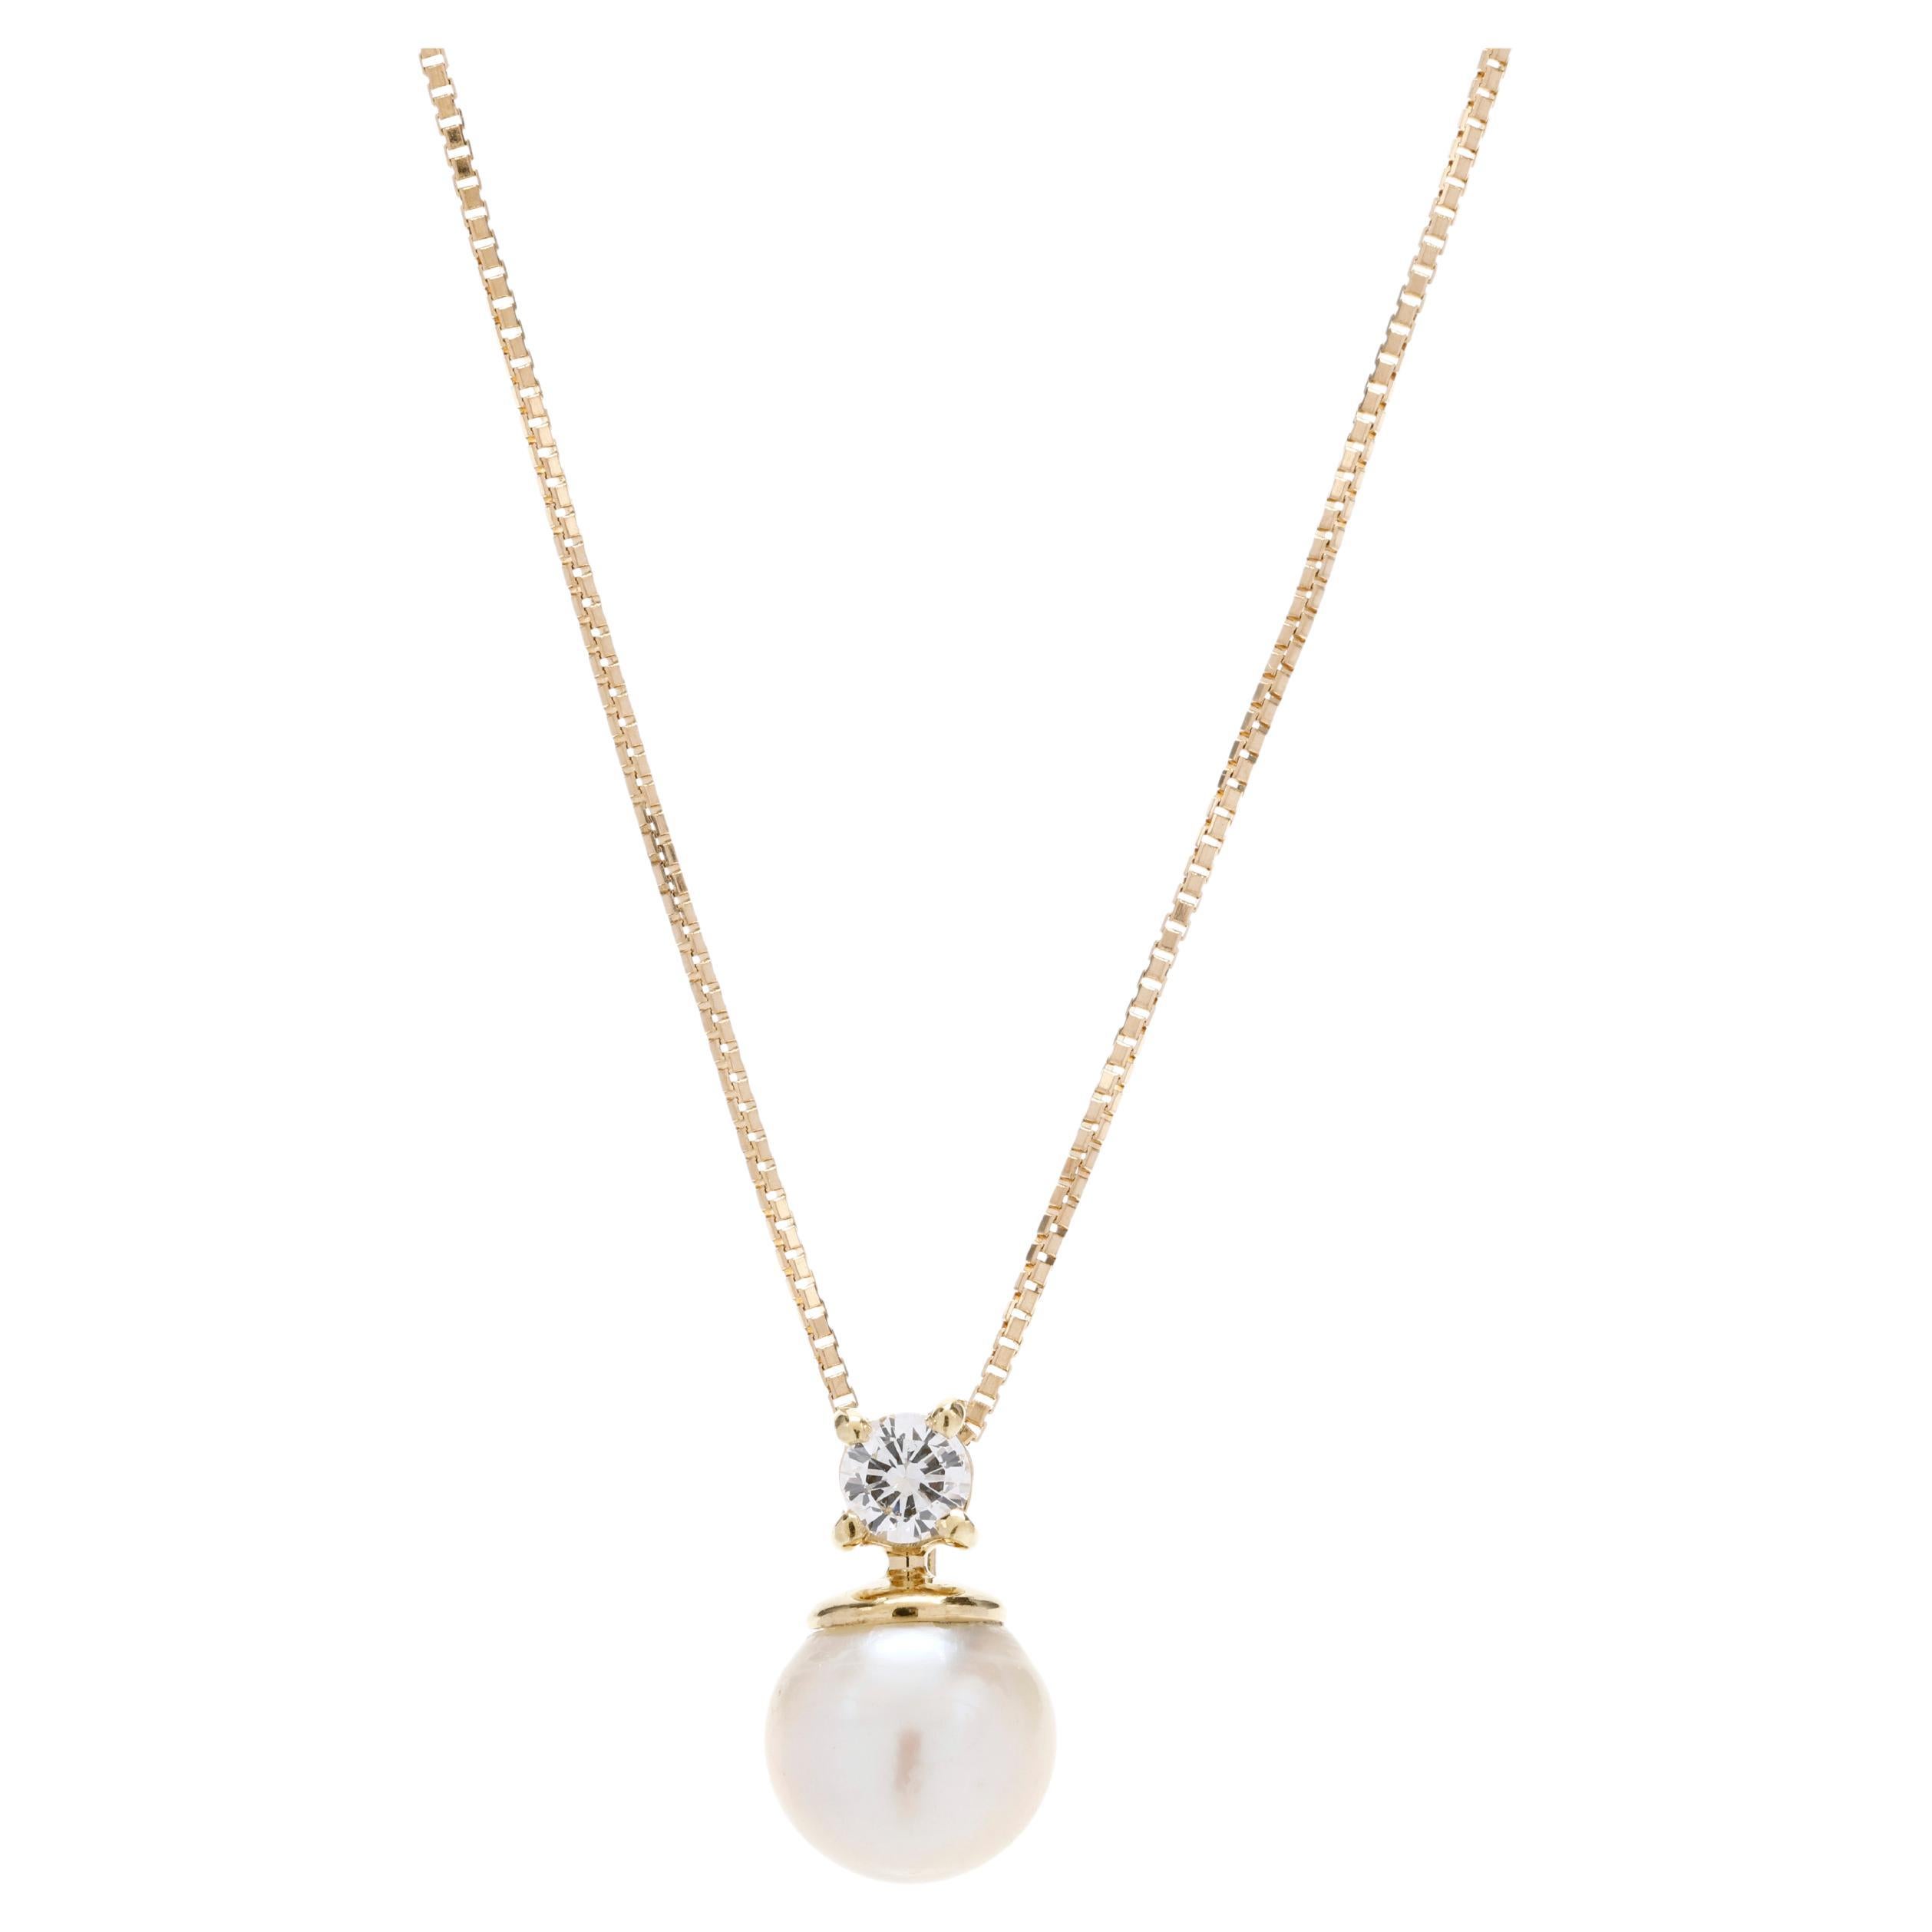 0.15ctw Diamond and Pearl Pendant Necklace 18k Yellow Gold, Length 18 Inches For Sale